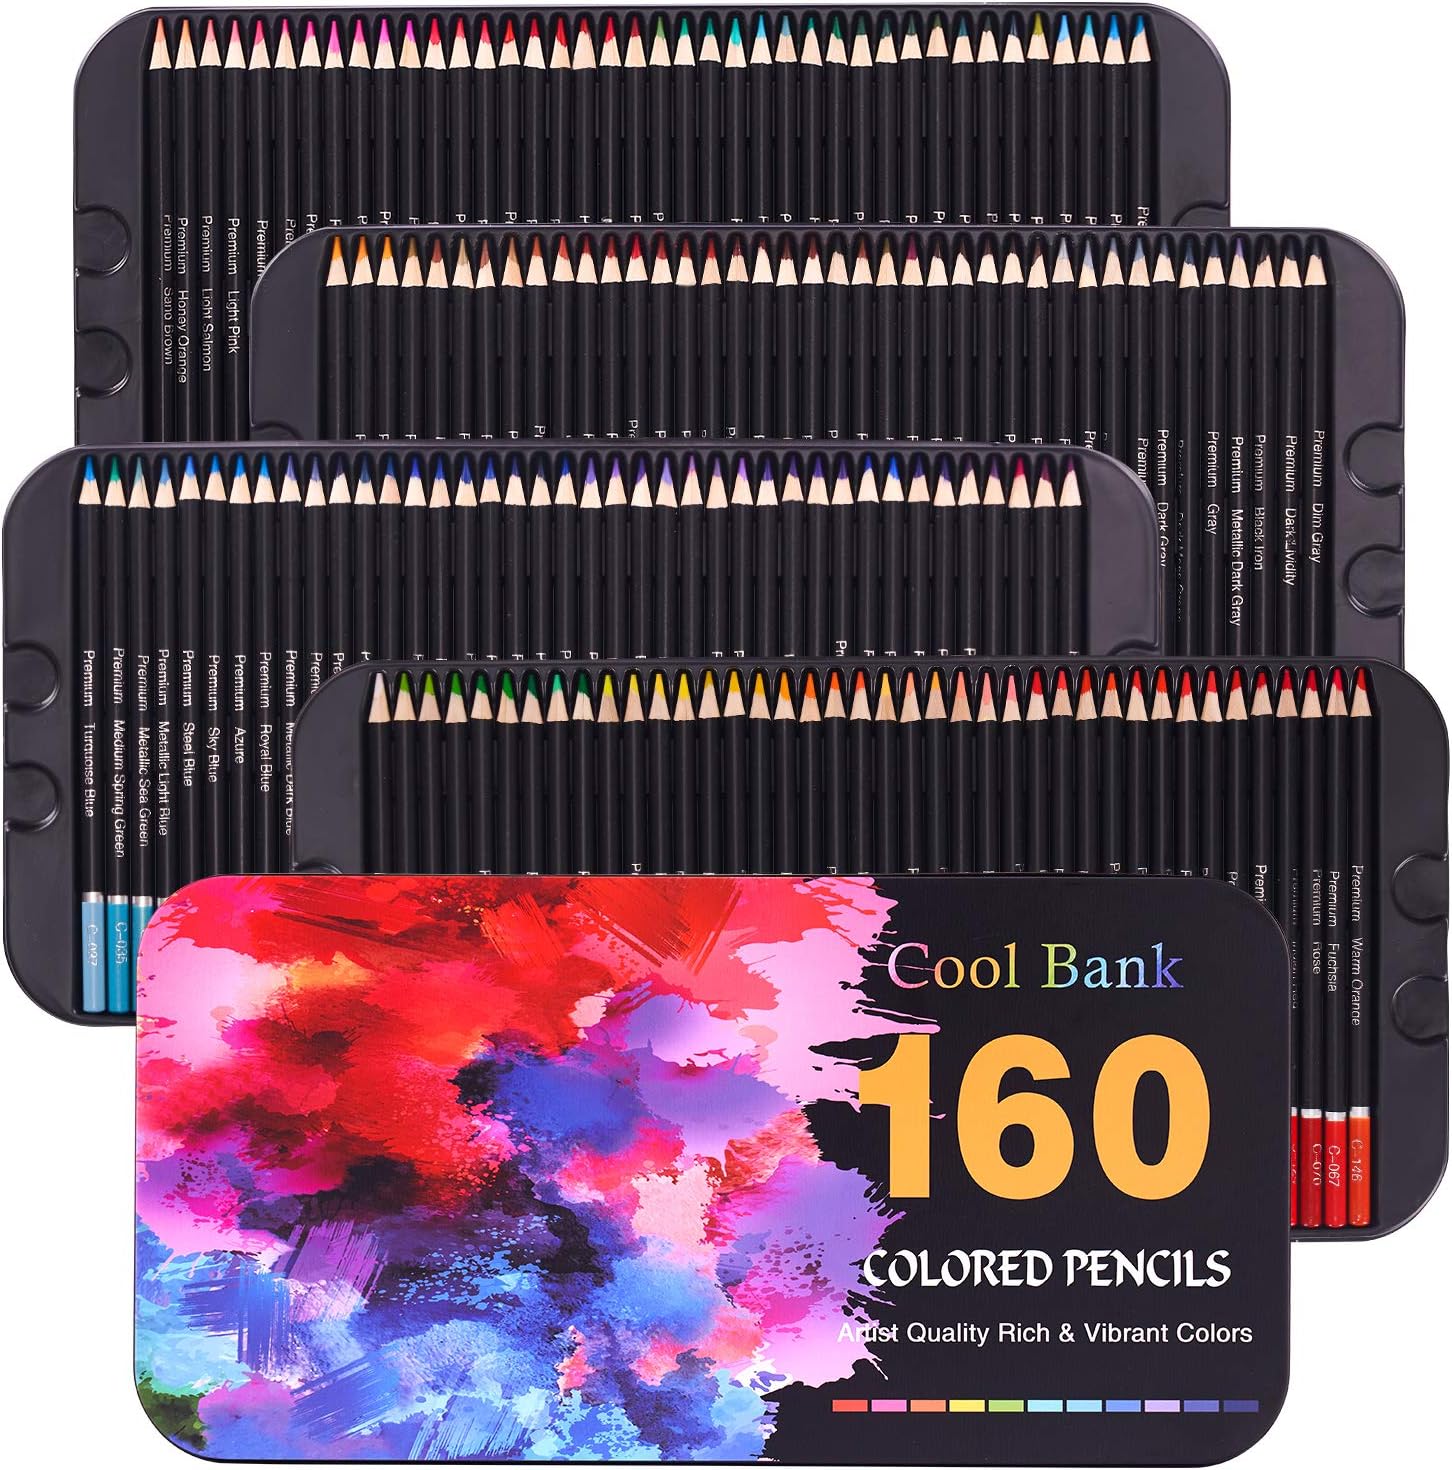 160 Professional Colored Pencils, Artist Pencils Set for Coloring Books, Premium Artist Soft Series Lead with Vibrant Colors for Sketching, Shading & Coloring in Tin Box - image 2 of 7